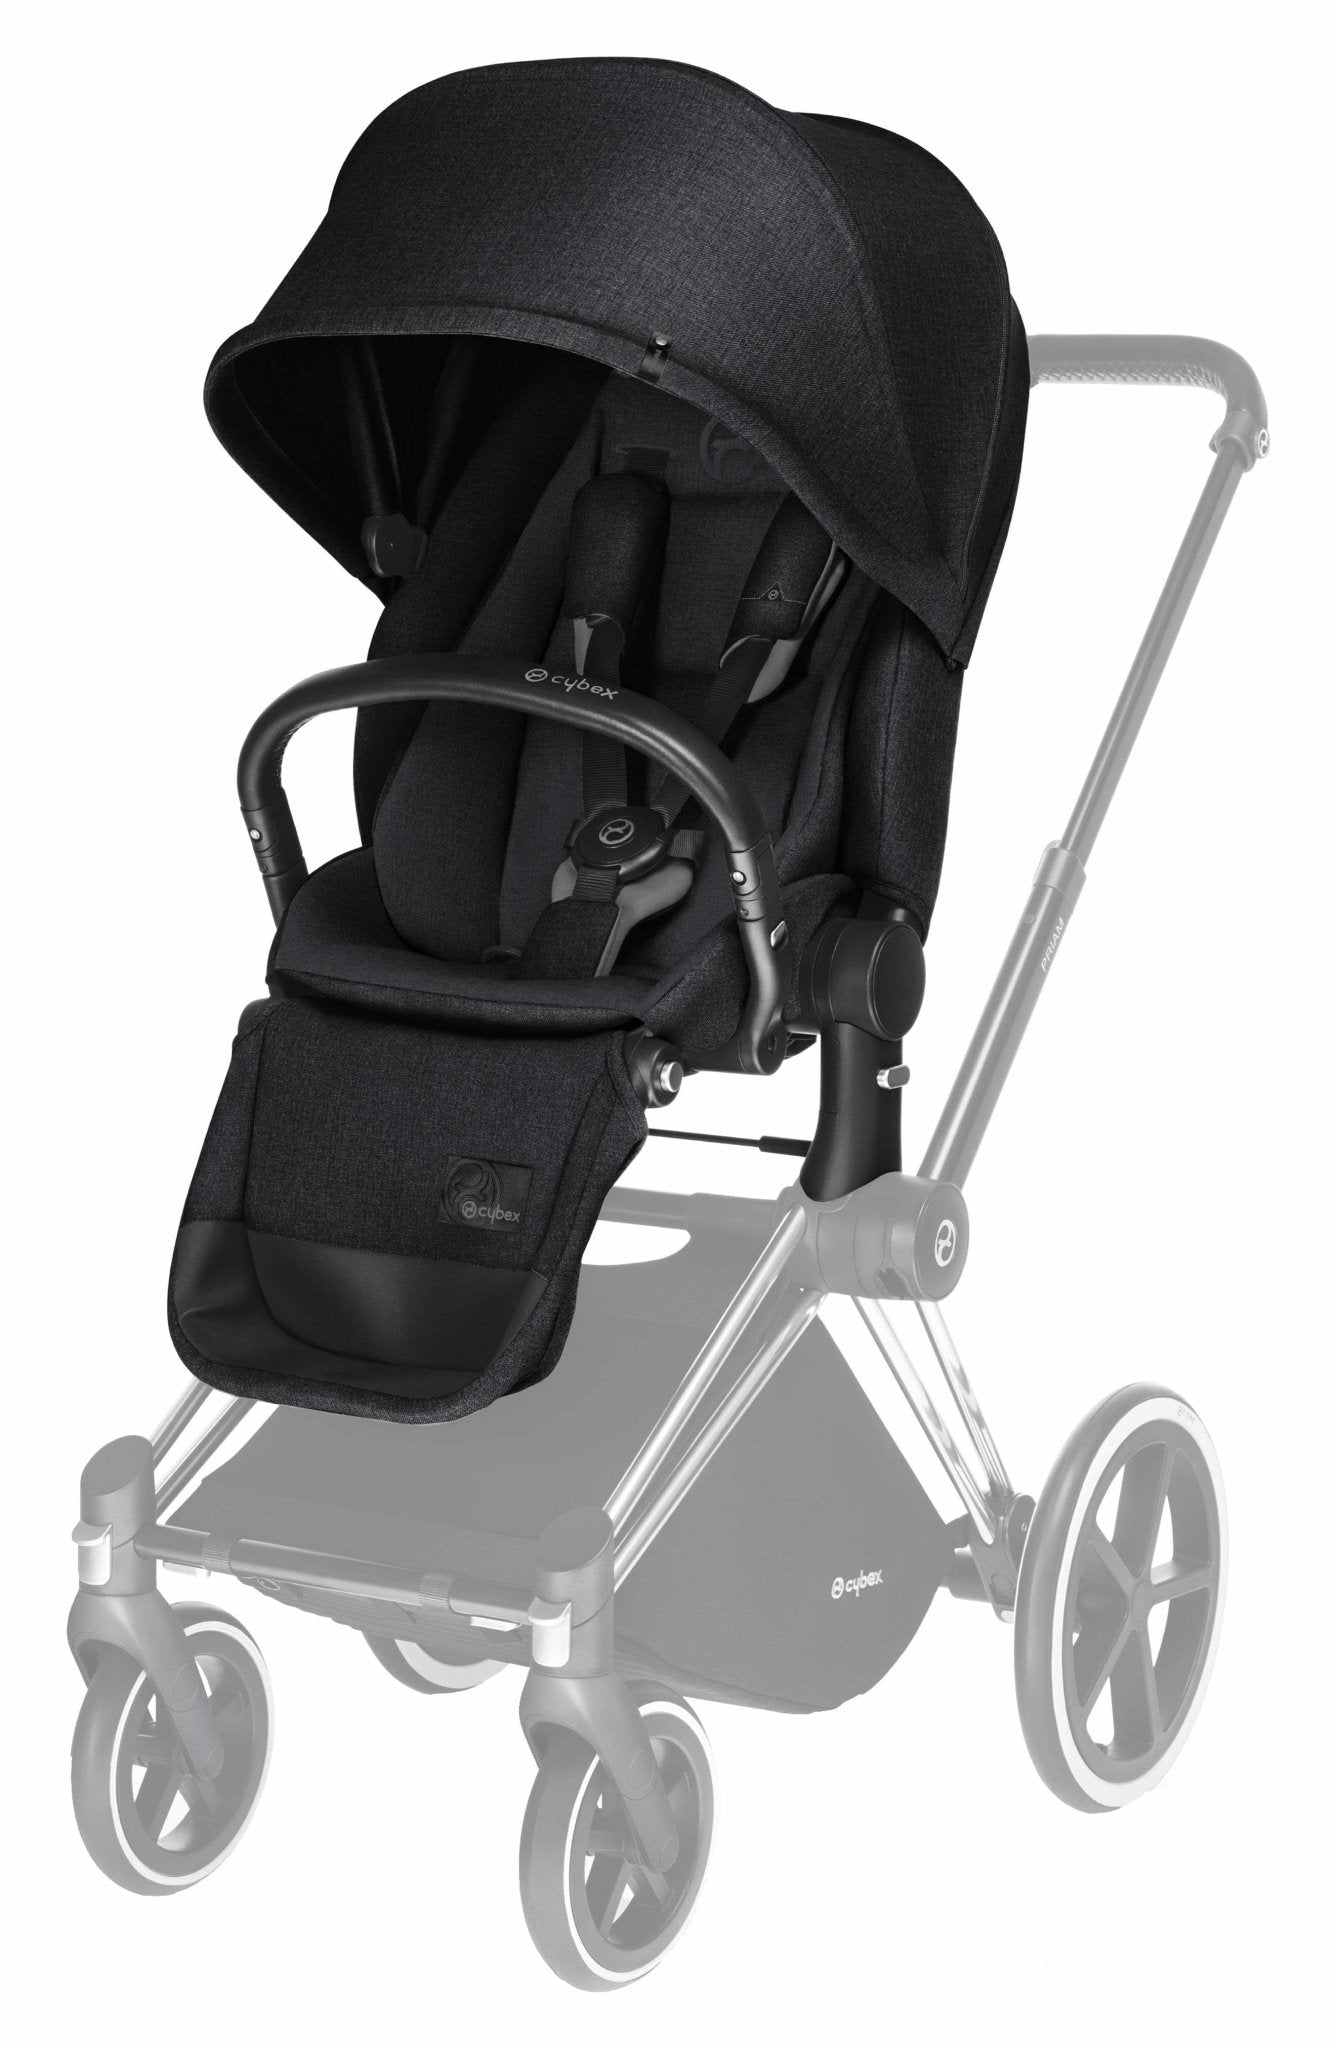 CYBEX Priam Lux Seat - ANB Baby -$300 - $500